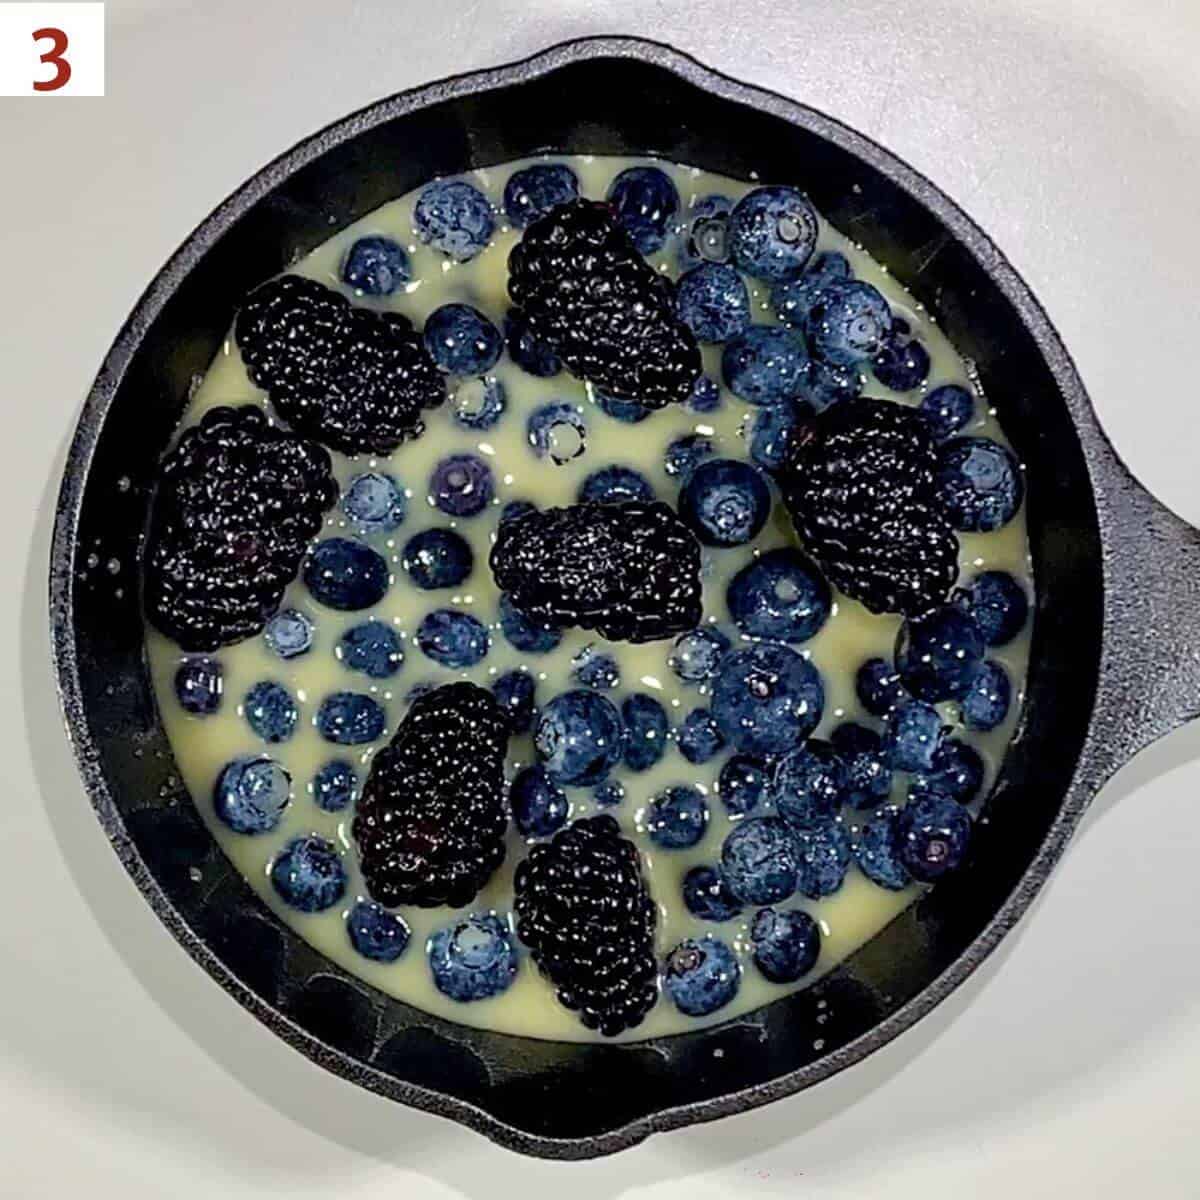 Berry mixture in the small cast iron skillet